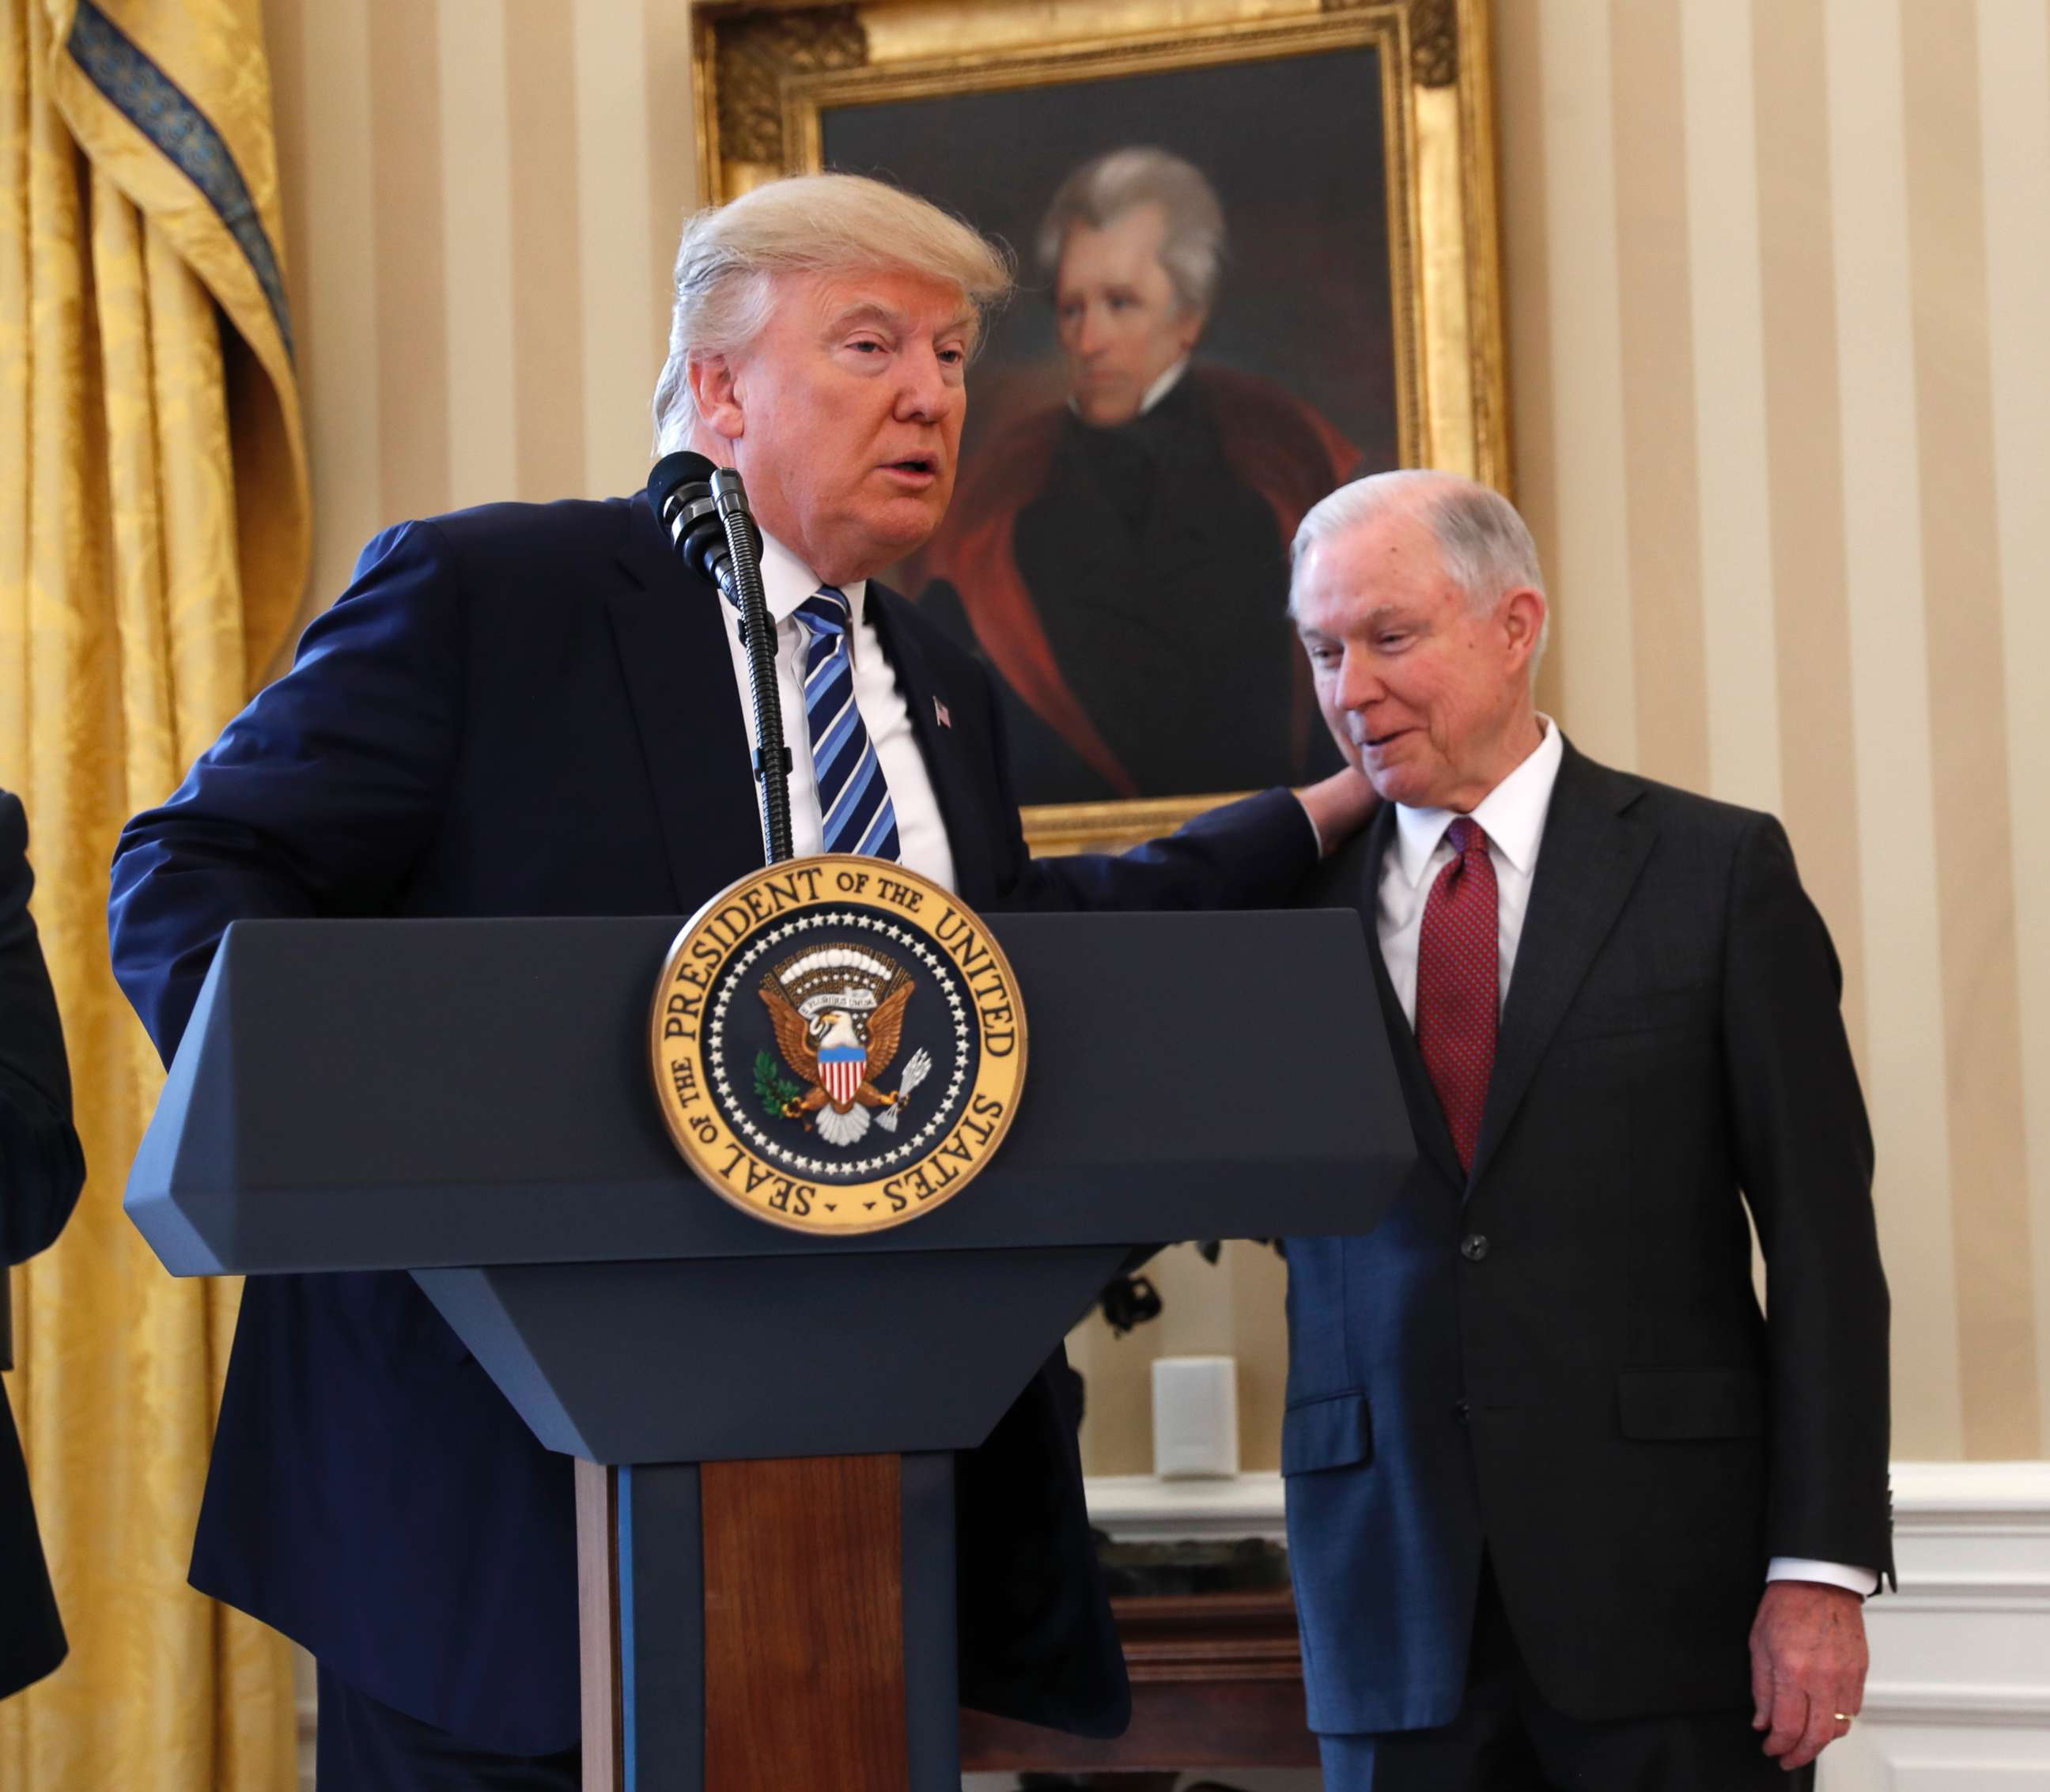 PHOTO: President Donald Trump talks to Attorney General Jeff Sessions in the Oval Office of the White House in Washington, Thursday, Feb. 9, 2017, before Vice President Mike Pence administered the oath of office Sessions.